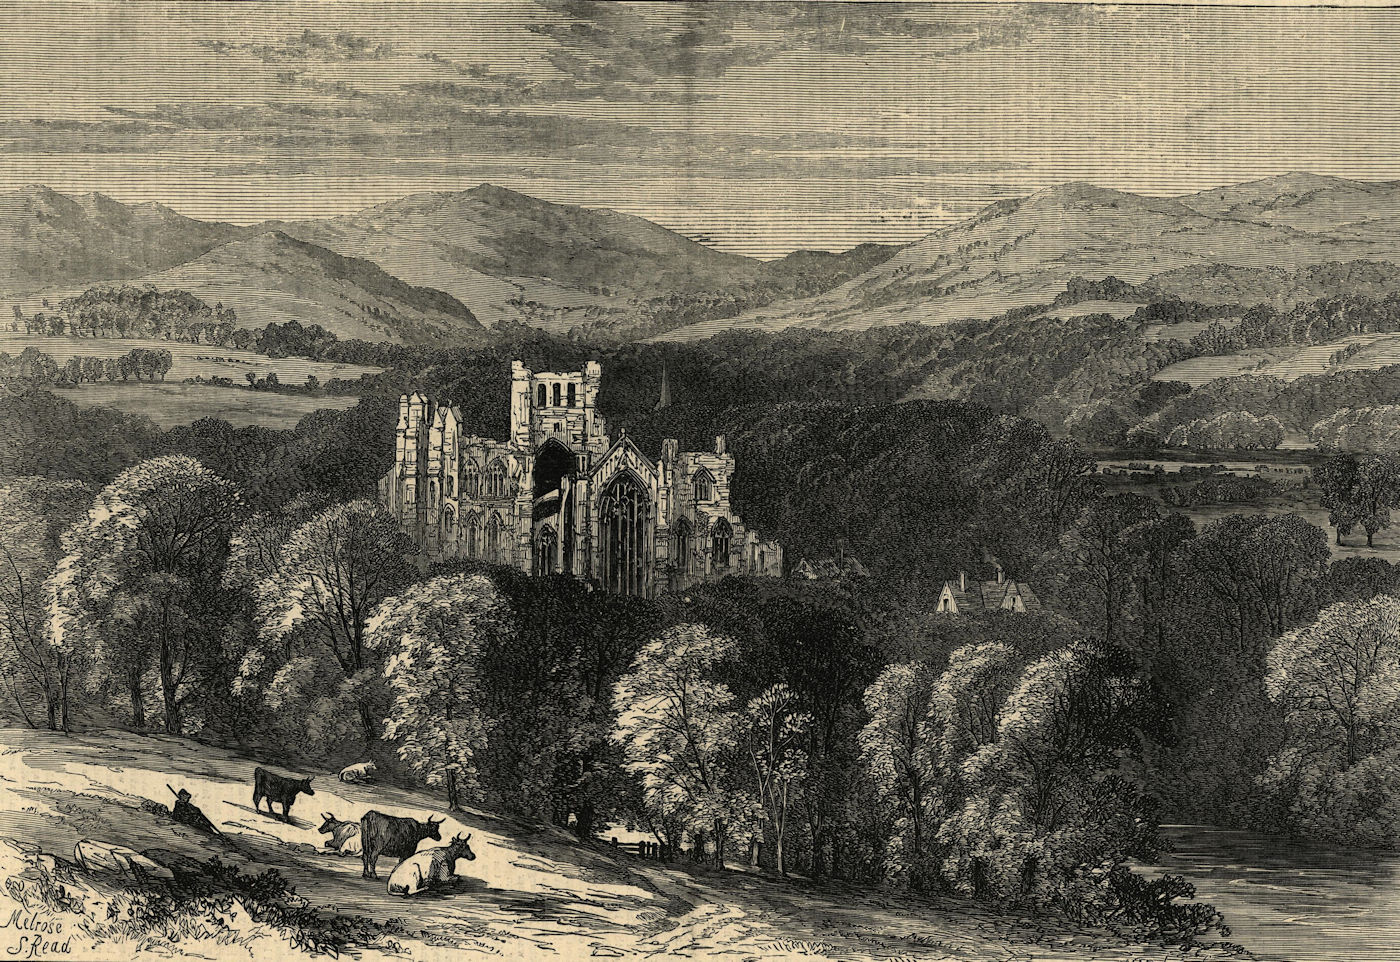 Associate Product Melrose Abbey. Scotland. Churches 1871 antique ILN full page print